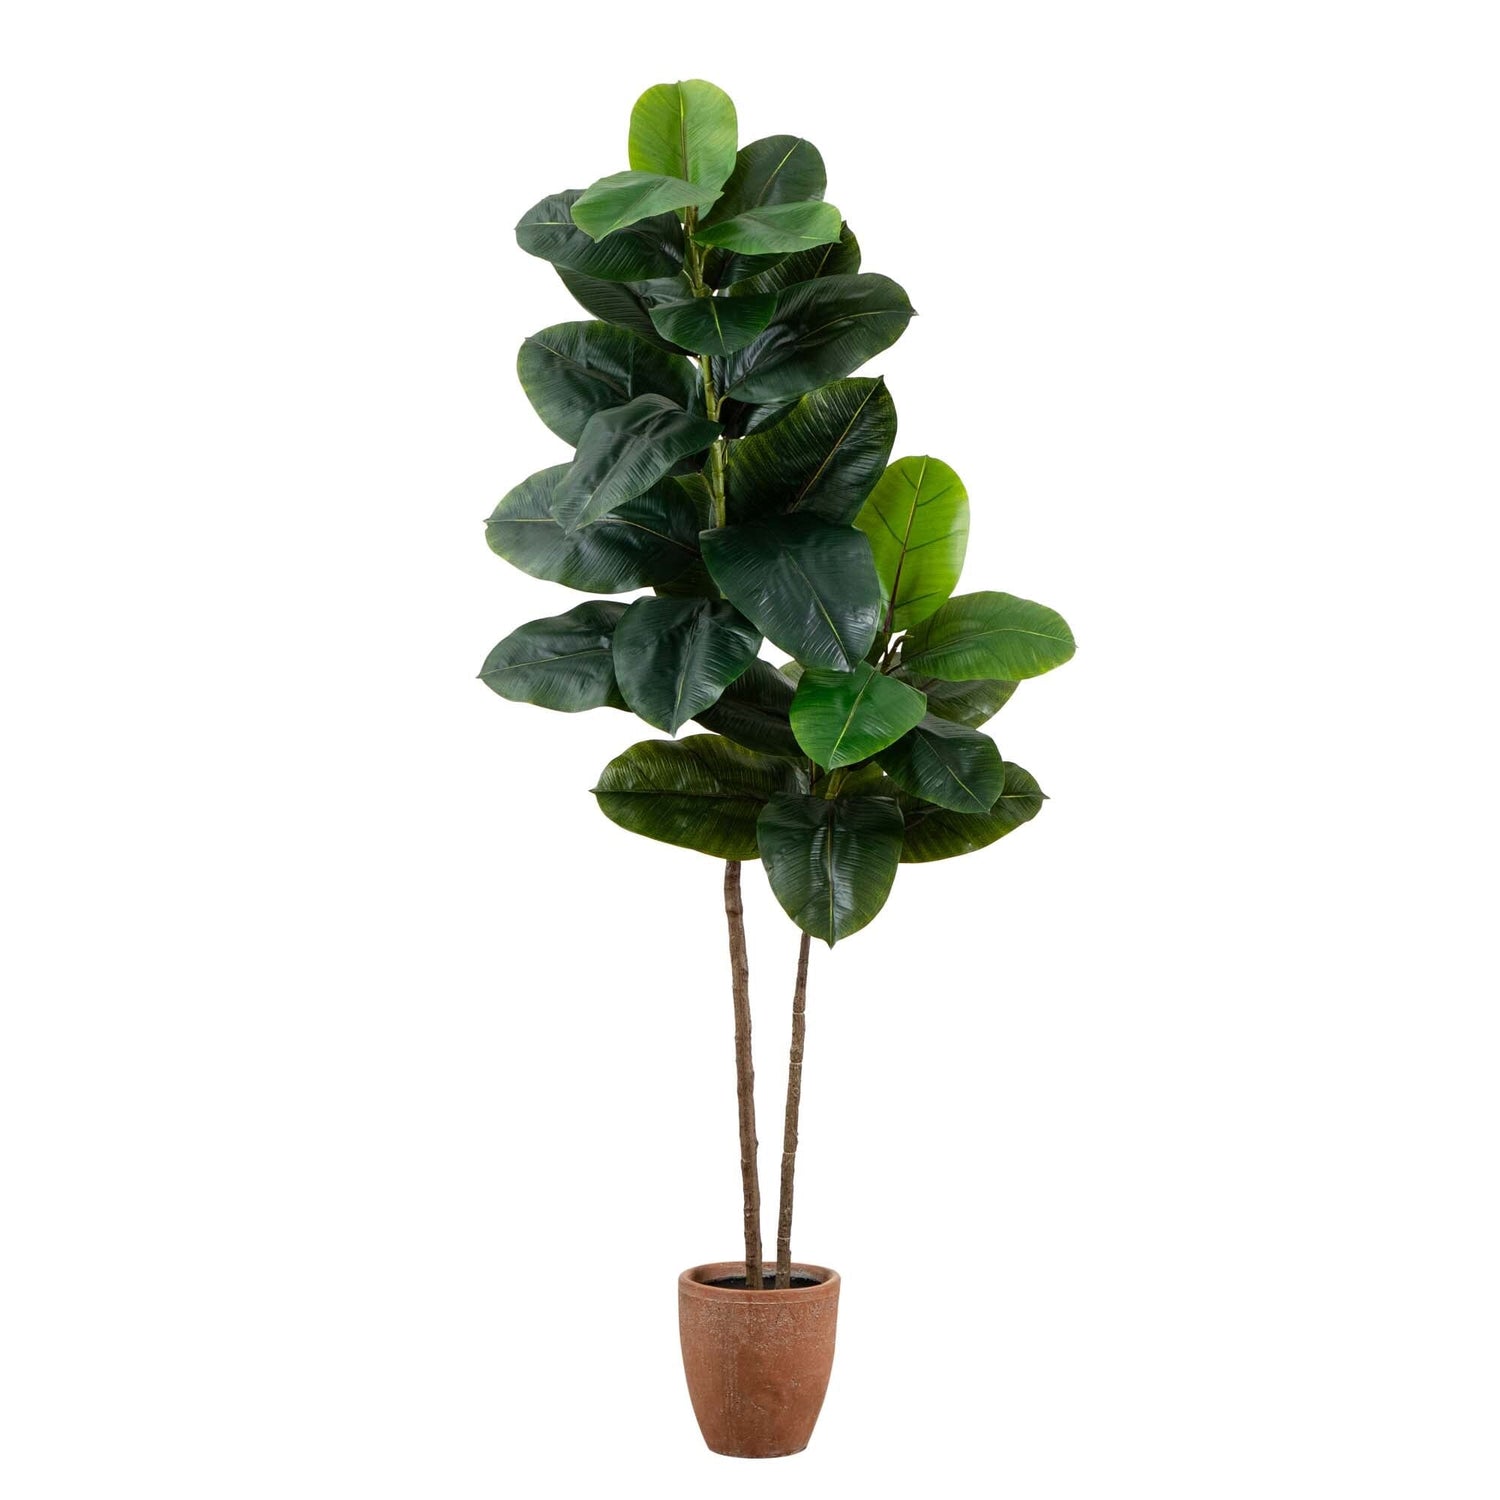 6’ Artificial Rubber Tree in Decorative Planter with Real Touch Leaves